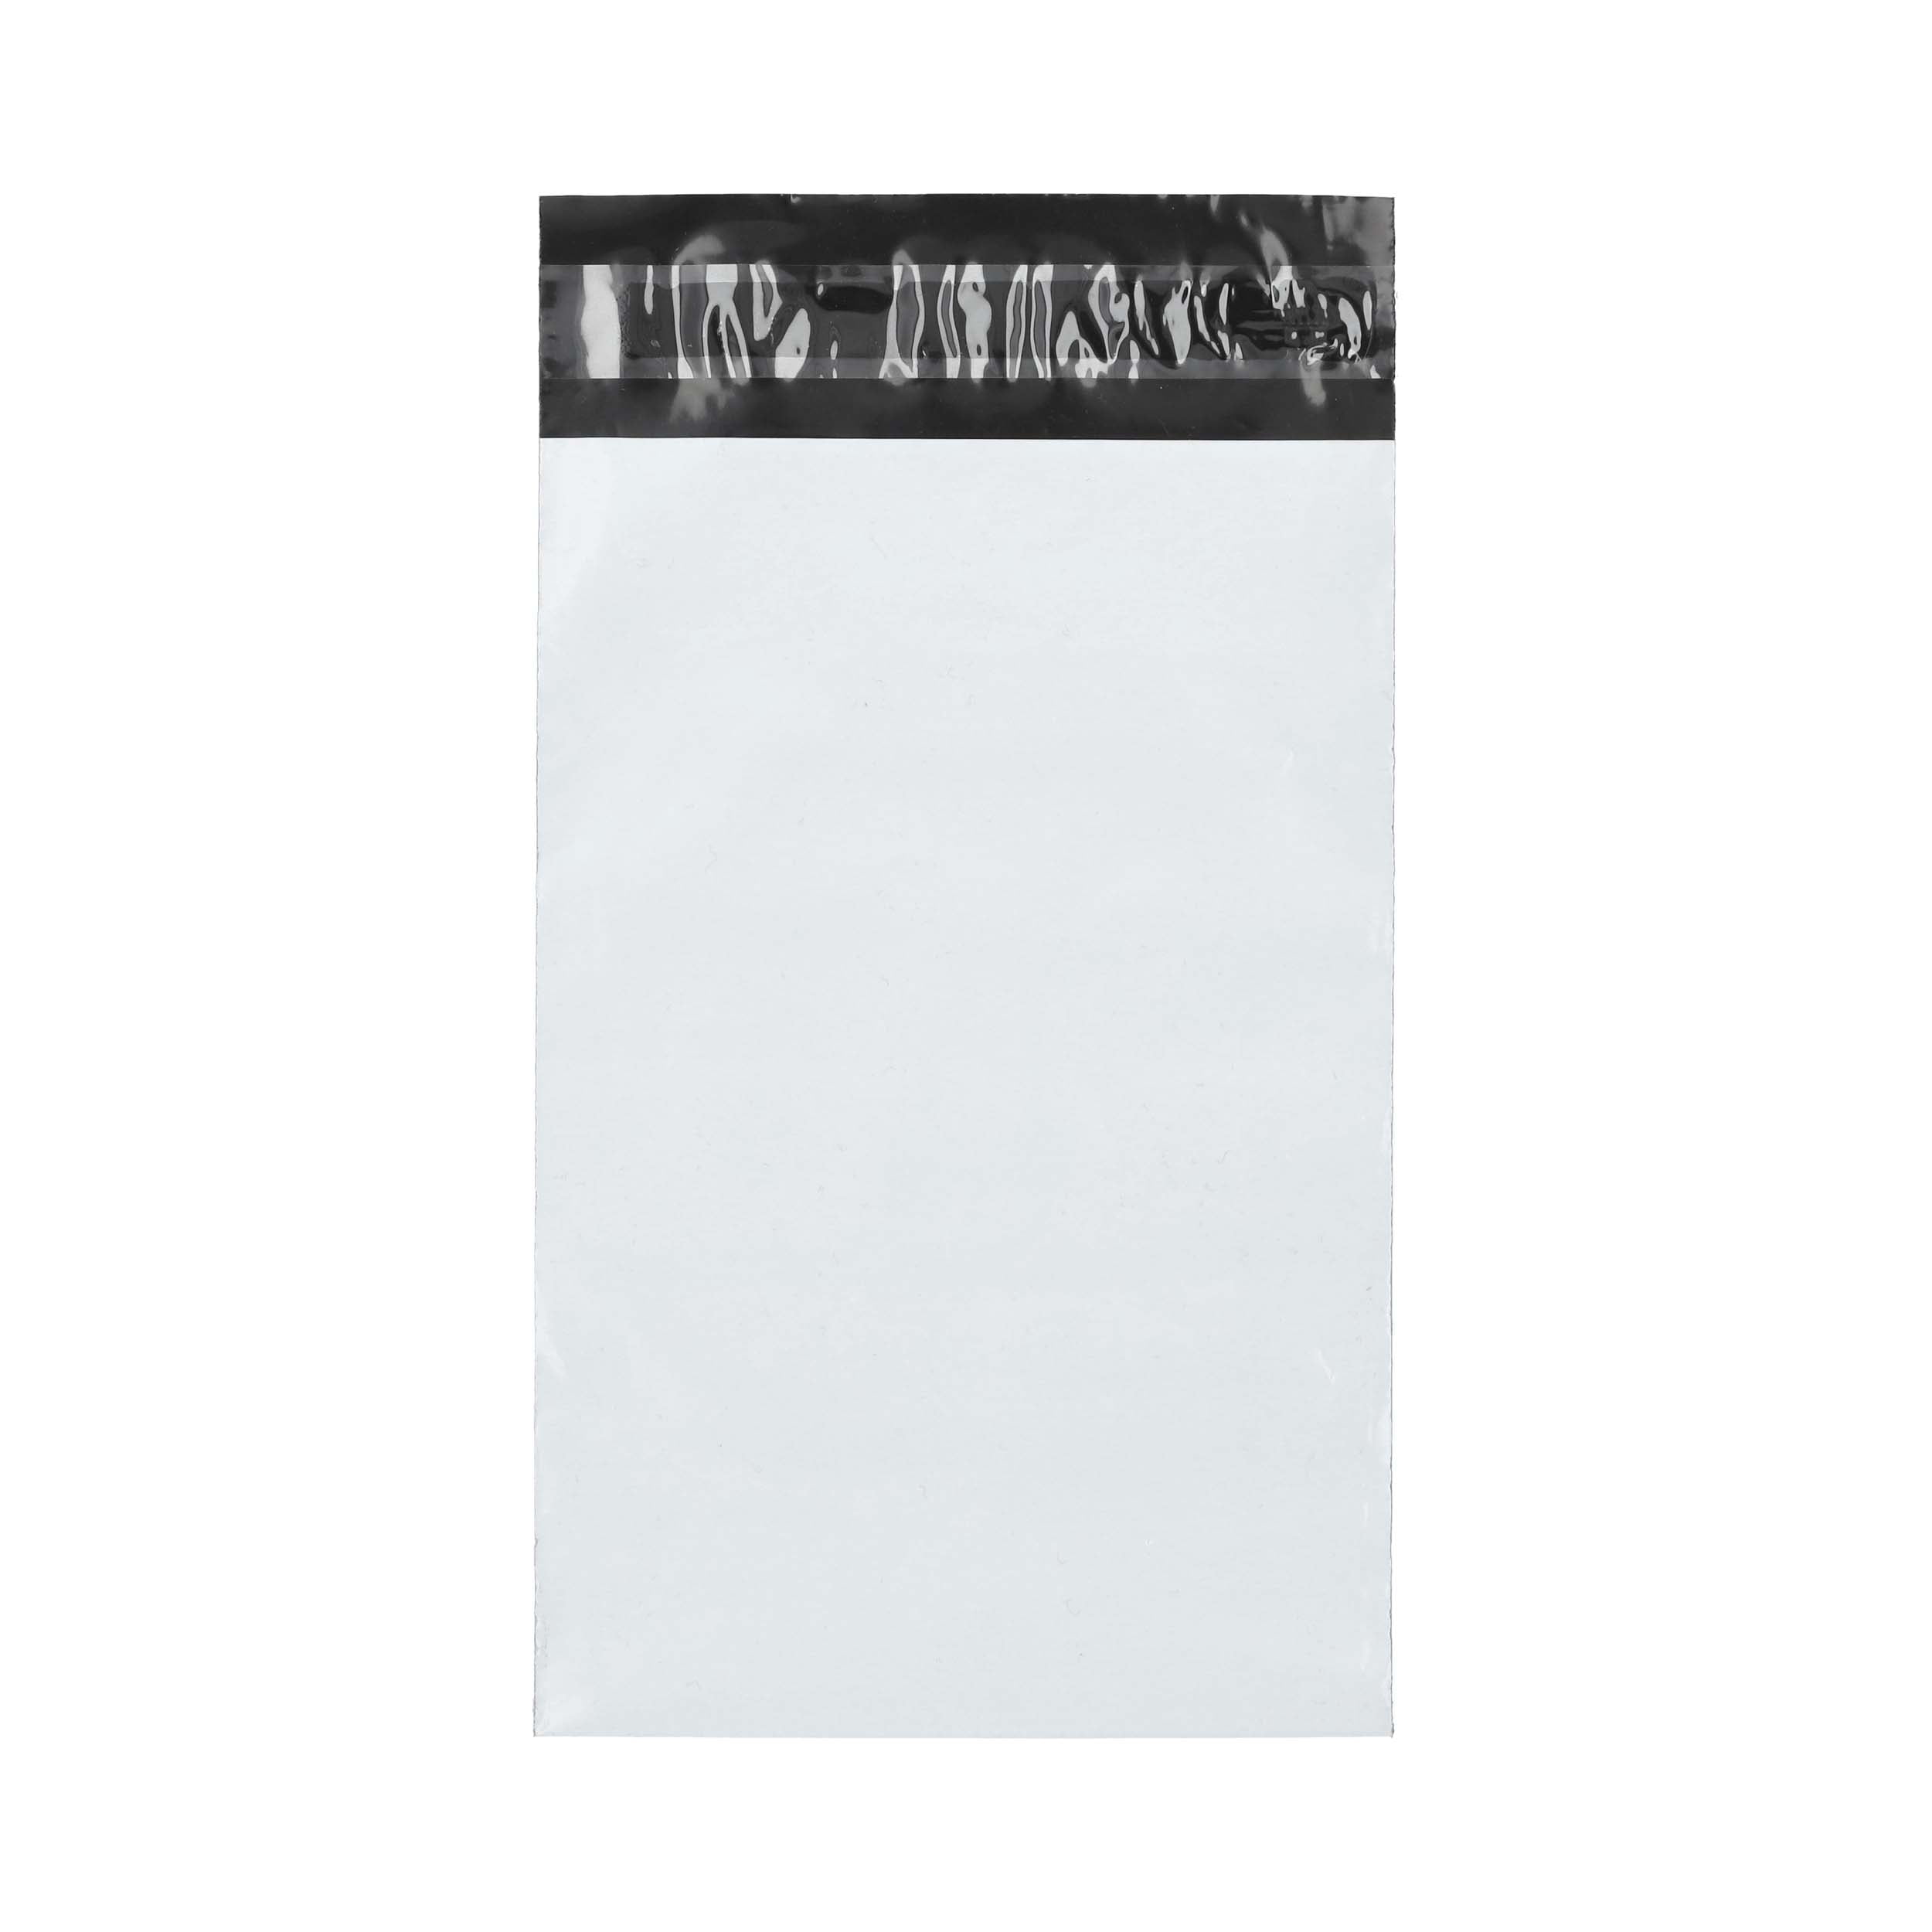 100-19x24 WHITE POLY MAILERS ENVELOPES BAGS 19 x 24-2.5MIL 